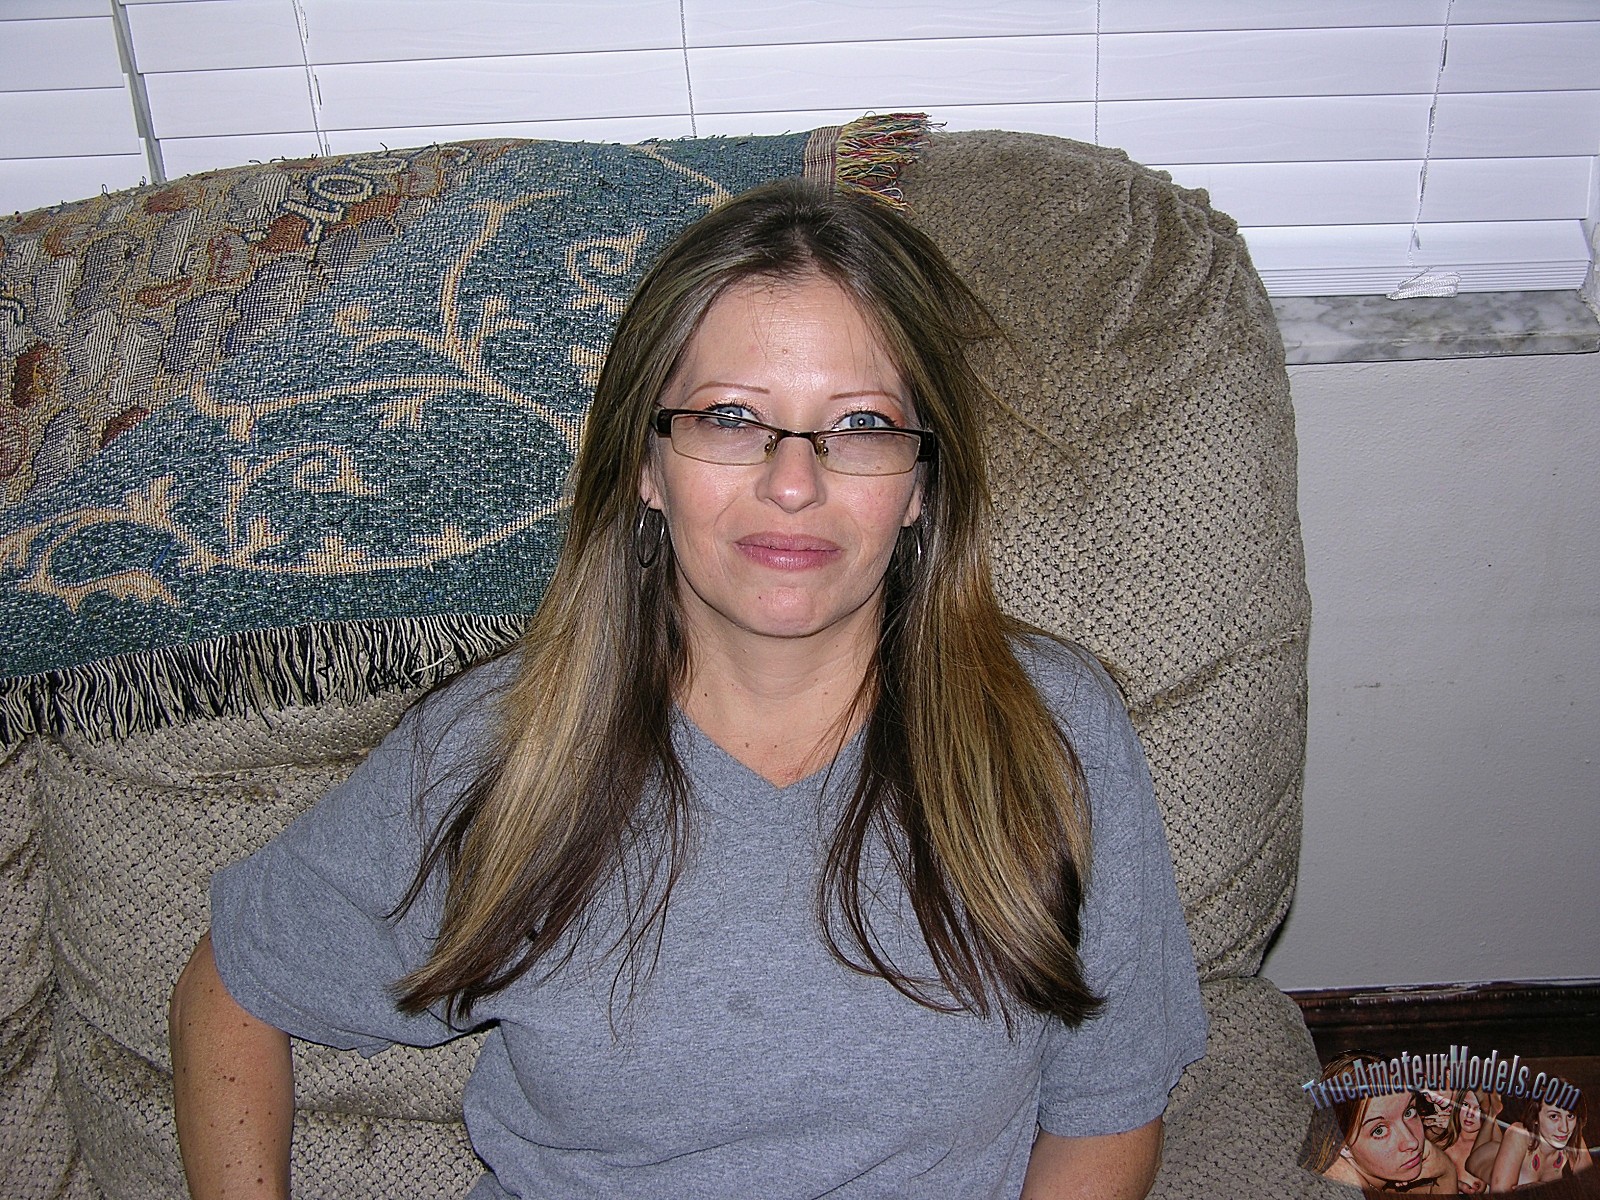 1600px x 1200px - MILF Blowjob With Glasses - Nikki D. From True Amateur Models